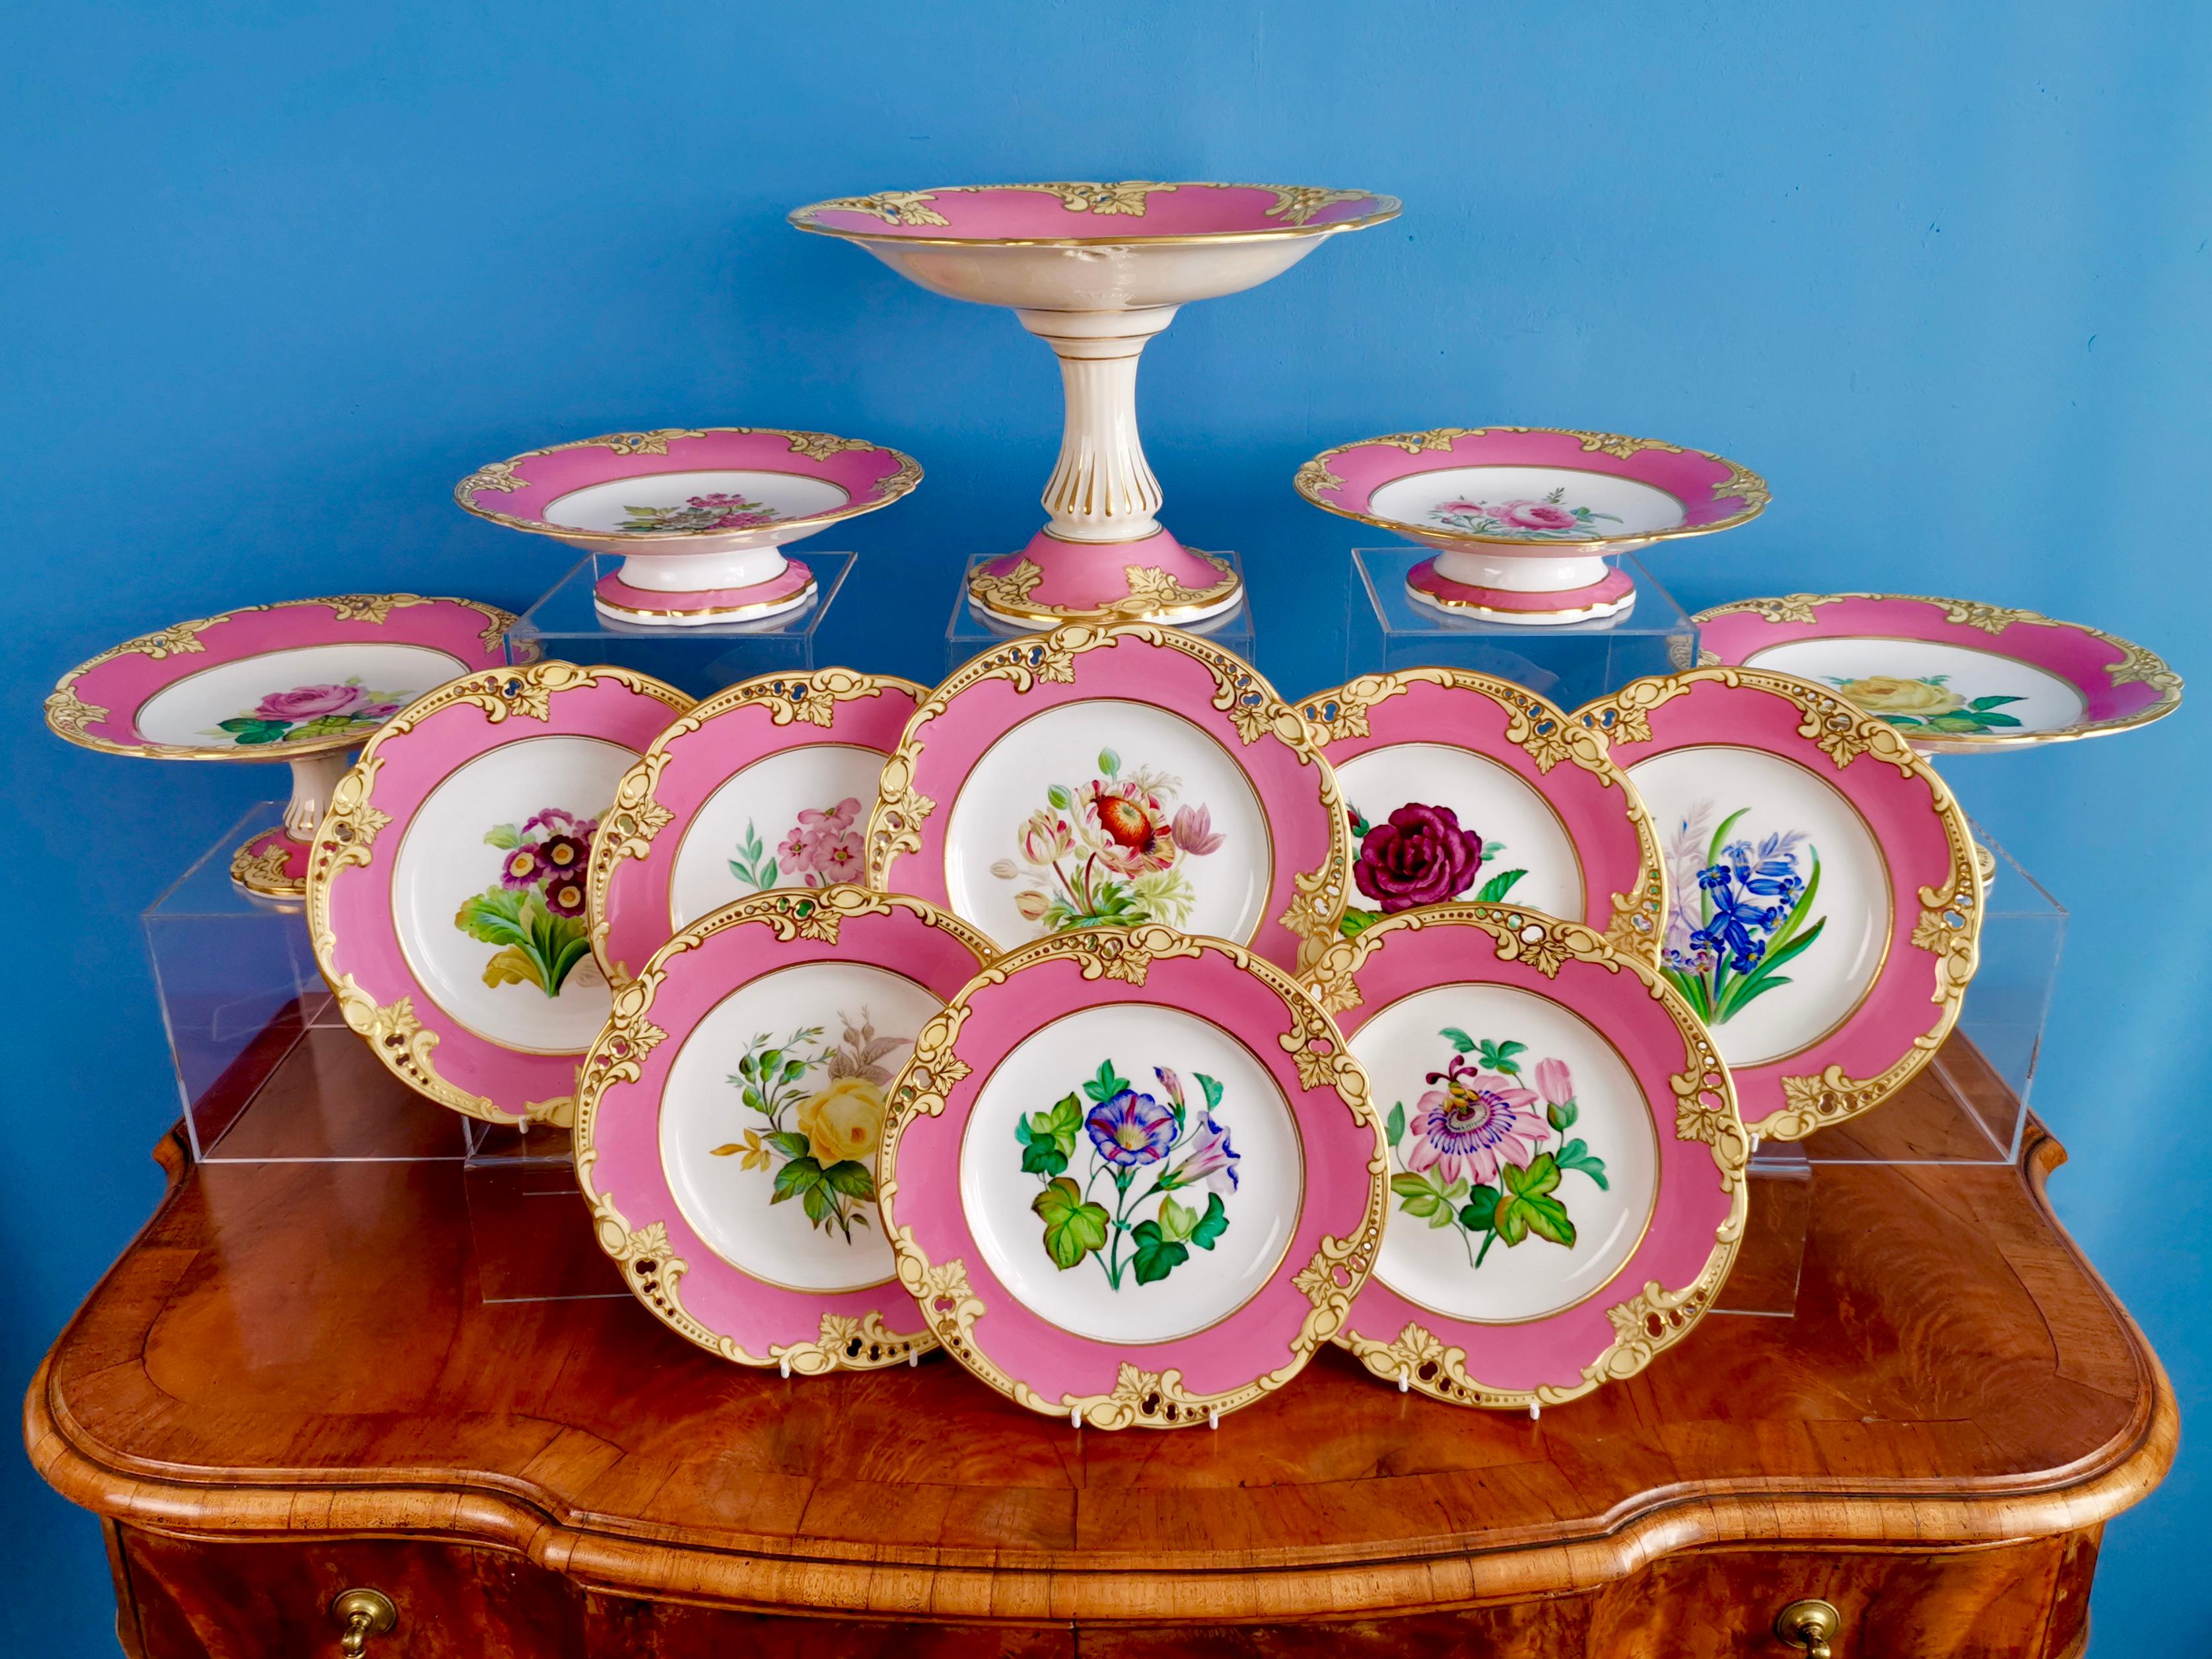 This is a stunning part dessert service from circa 1860 made by Brown Westhead & Moore. The service consists of a high footed tazza, two medium tazzas, two low tazzas and eight plates.

Brown-Westhead & Moore was a continuation of the famous